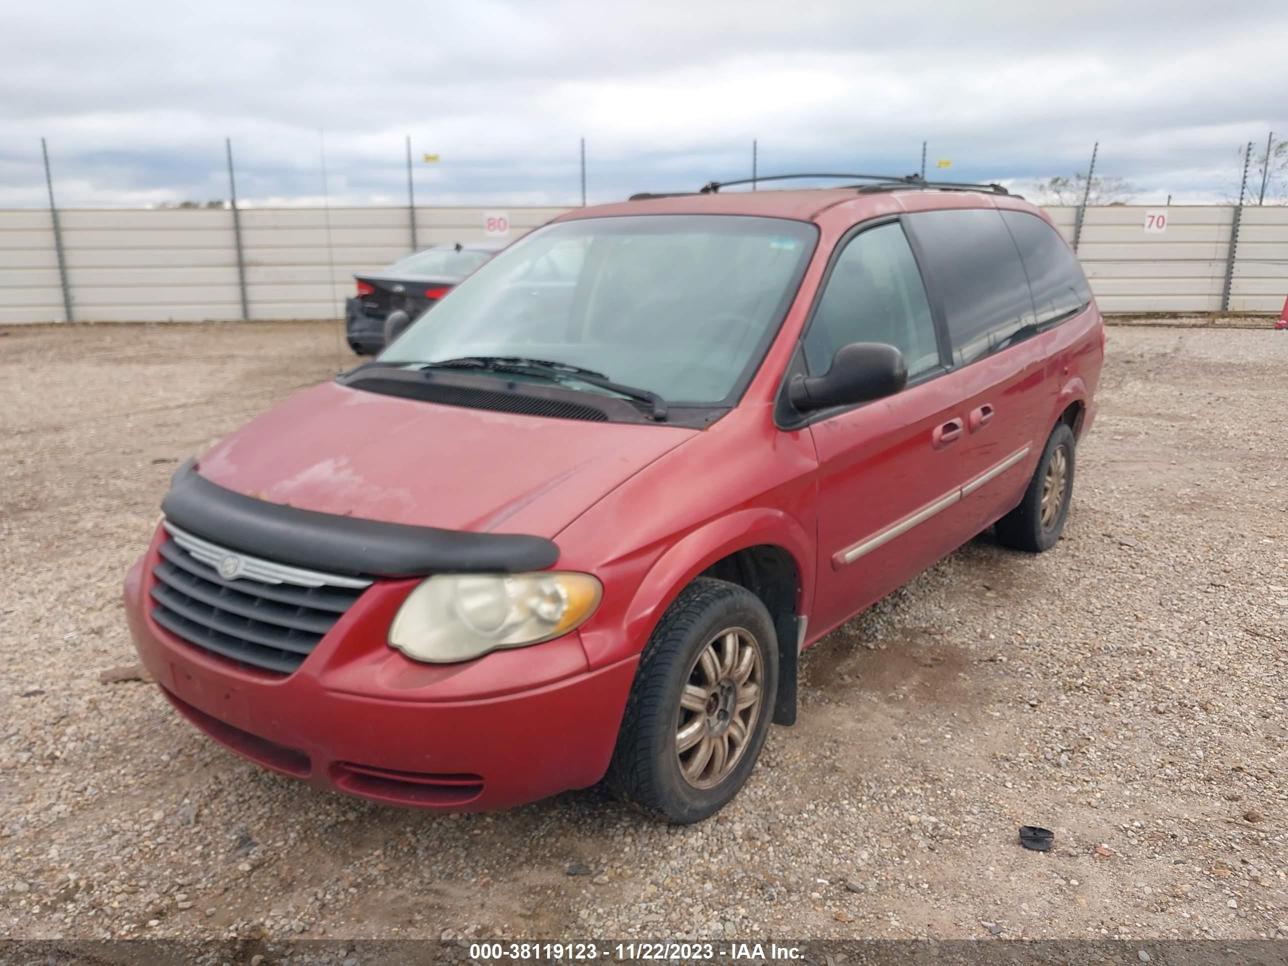 2A4GP54L36R661137  - CHRYSLER TOWN & COUNTRY  2006 IMG - 1